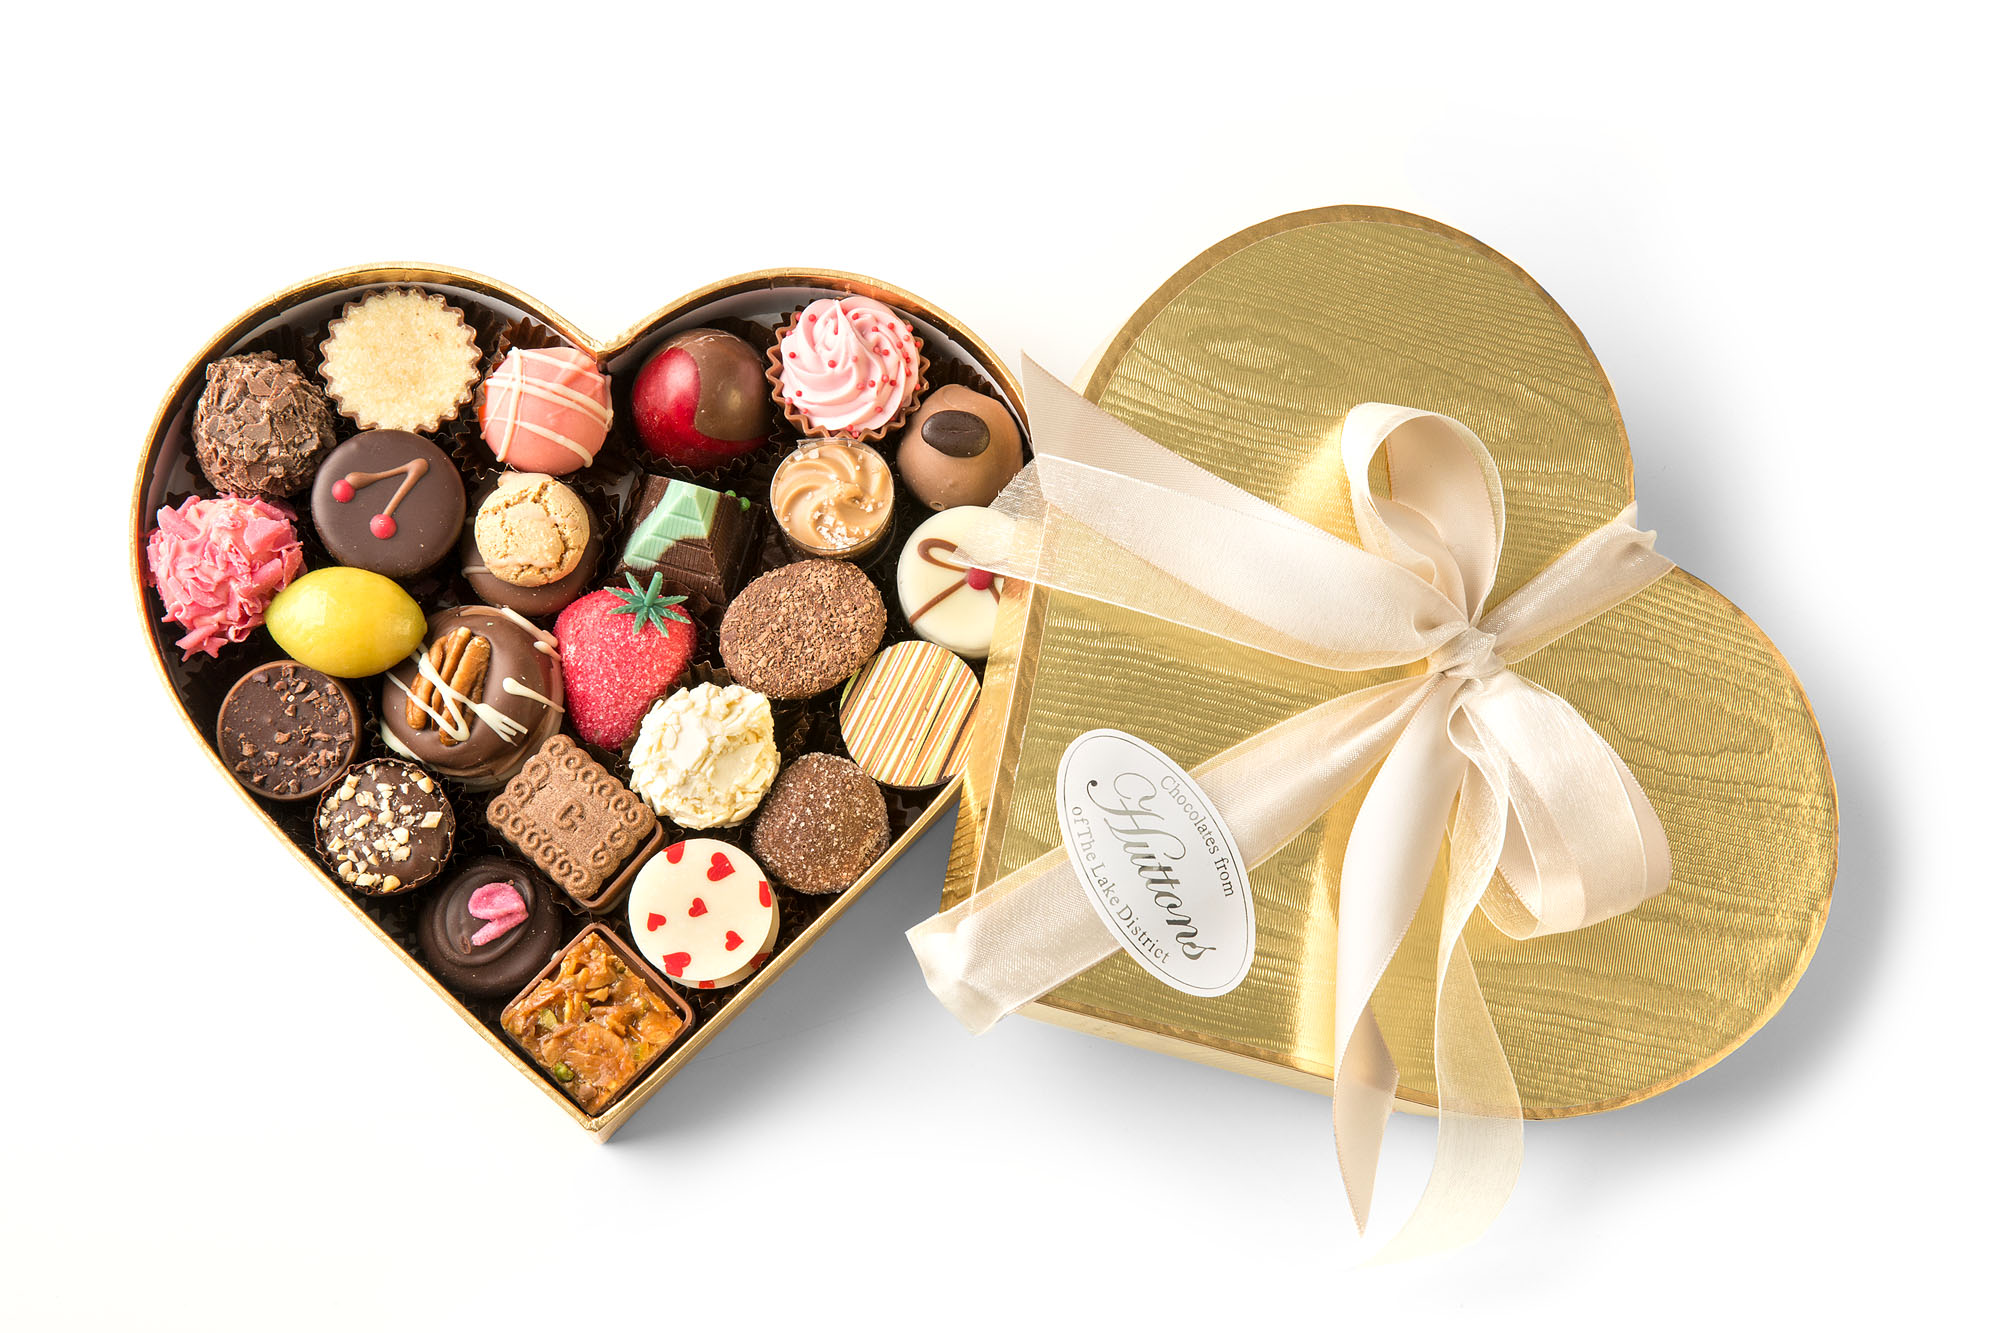 A luxury heart shaped chocolate box from godiva, filled with a selection of...